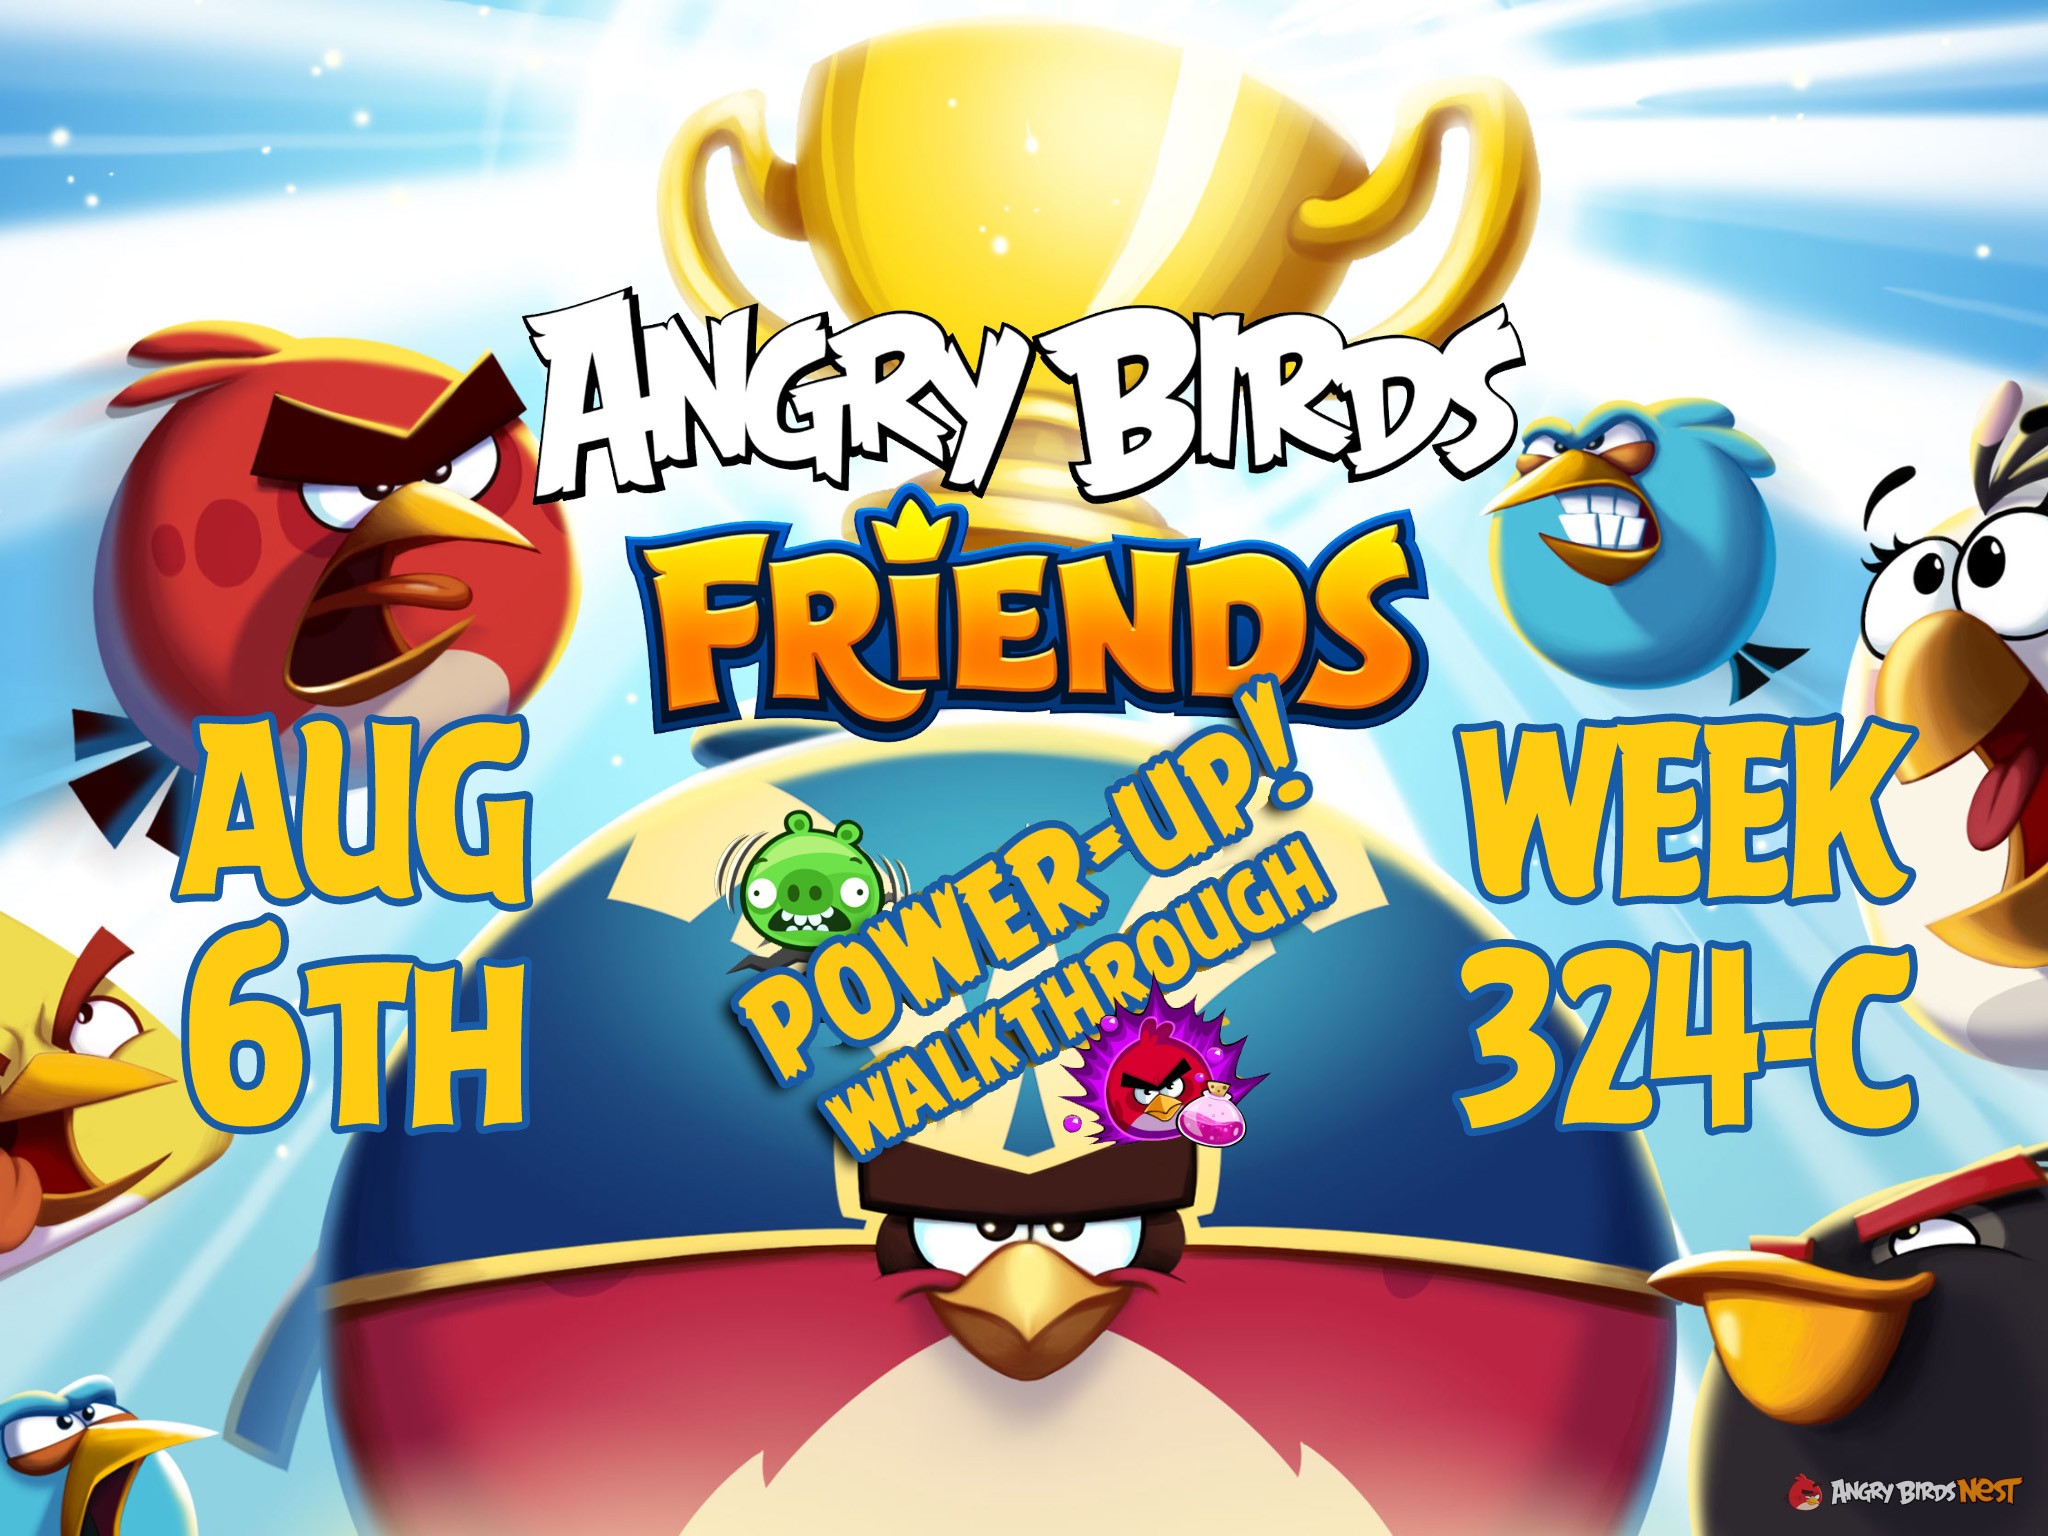 Angry-Birds-Friends-Tournament-Week-324-C-Feature-Image-PU